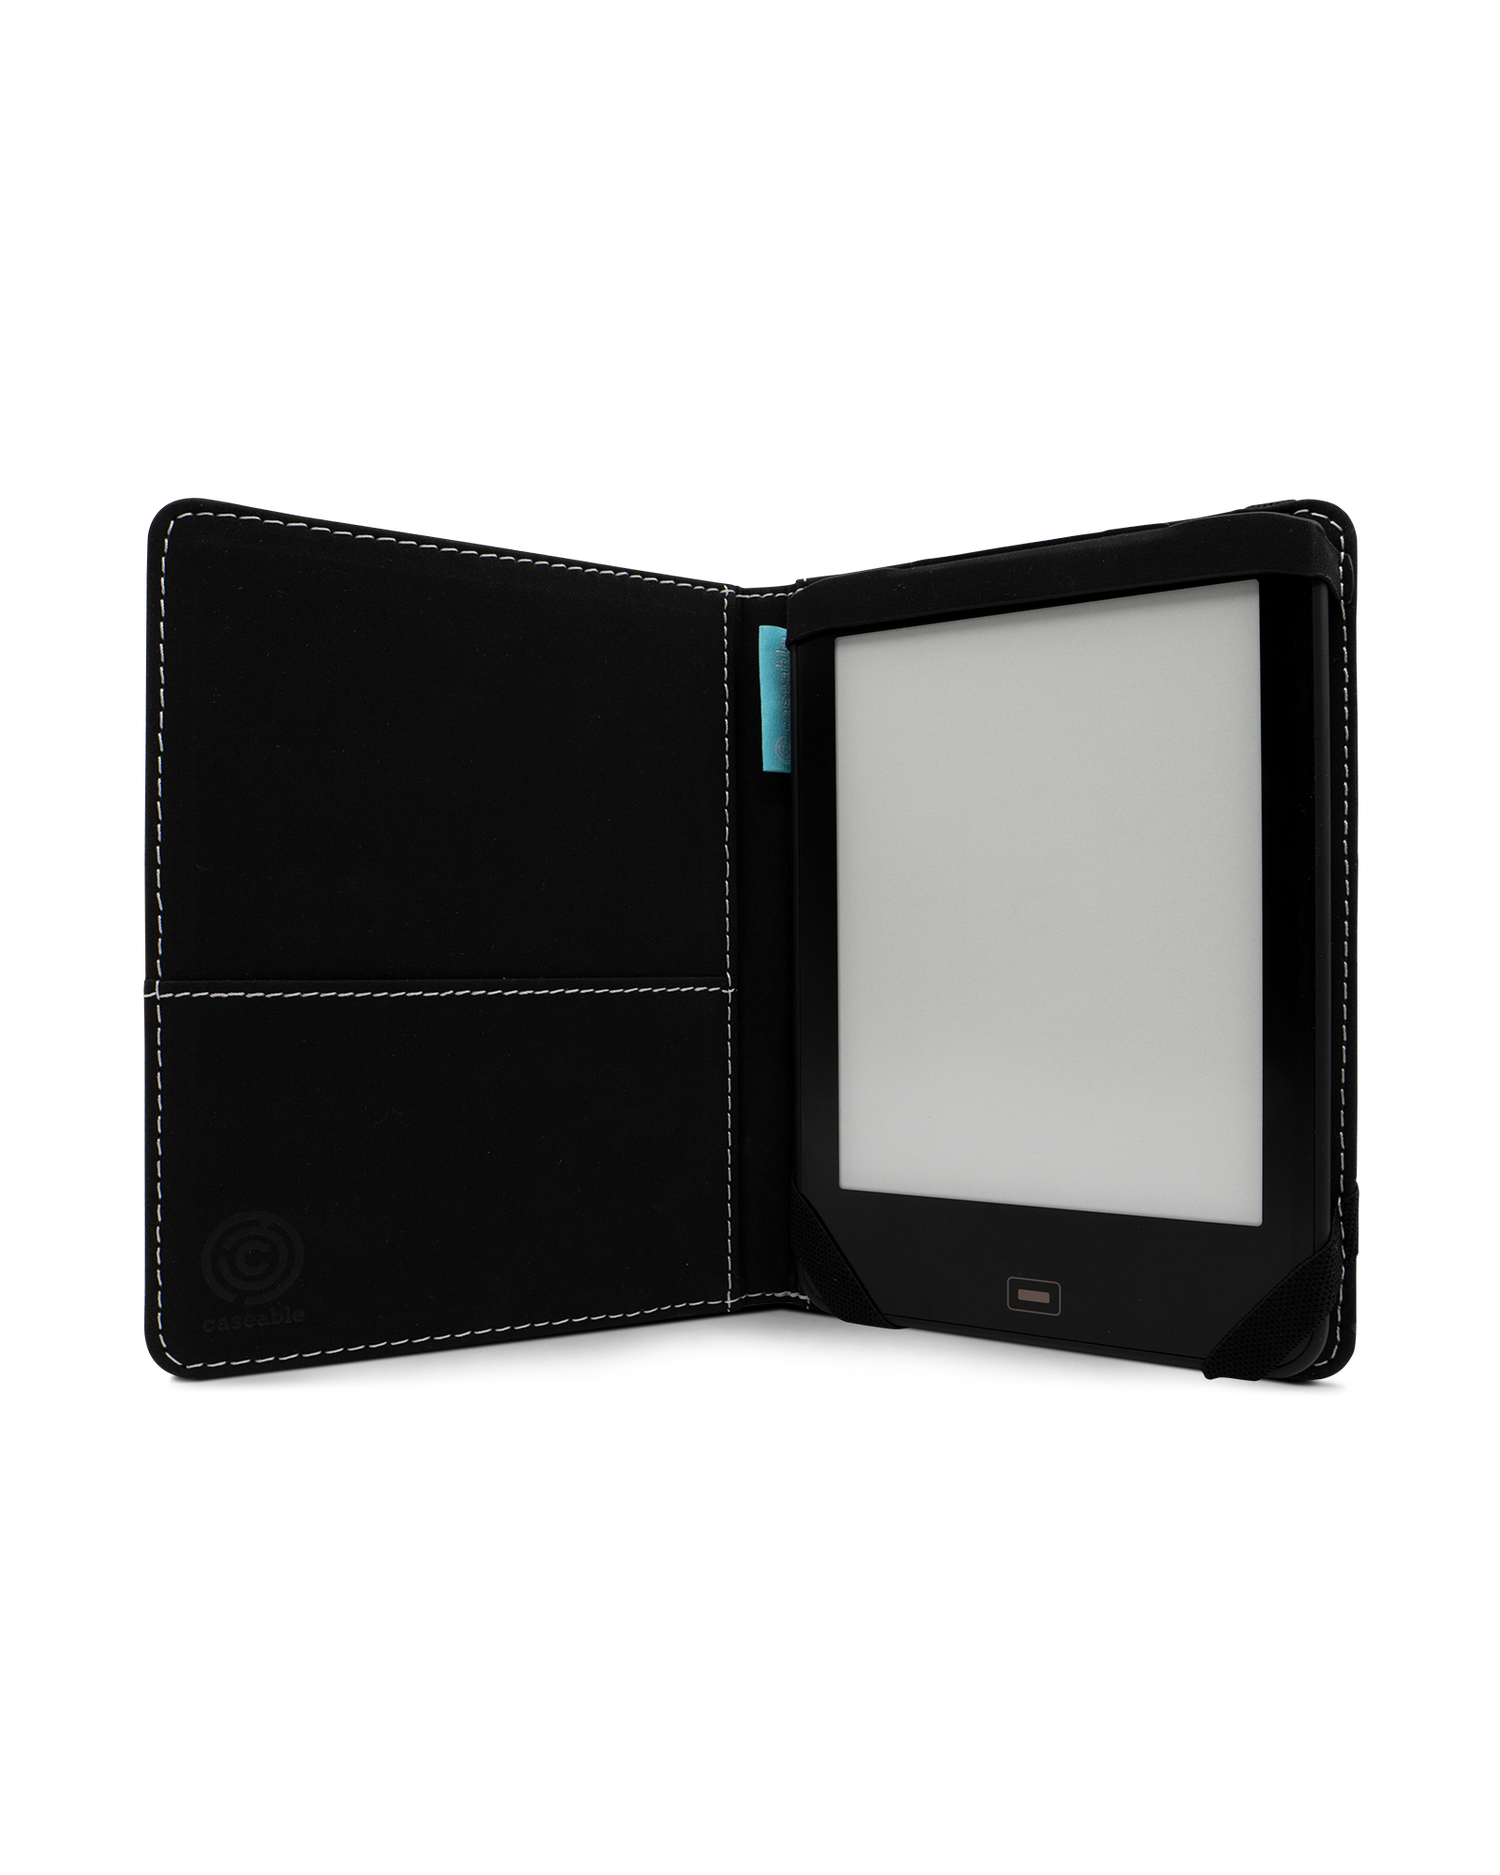 New York At Dusk eReader Case for tolino vision 1 to 4 HD: Opened interior view